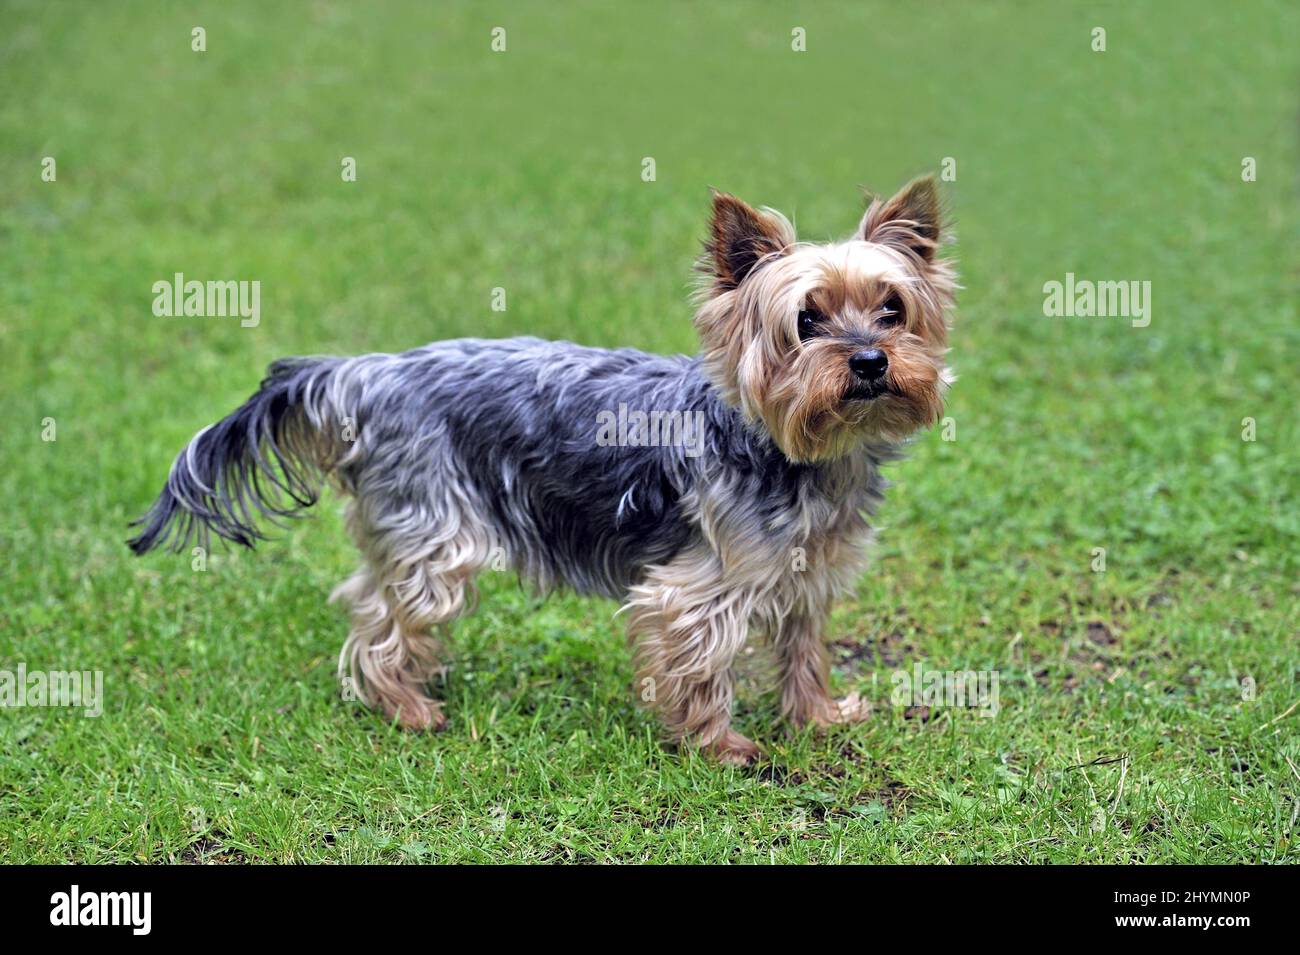 Yorkshire Terrier (Canis lupus f. familiaris), standing in a meadow, side view Stock Photo